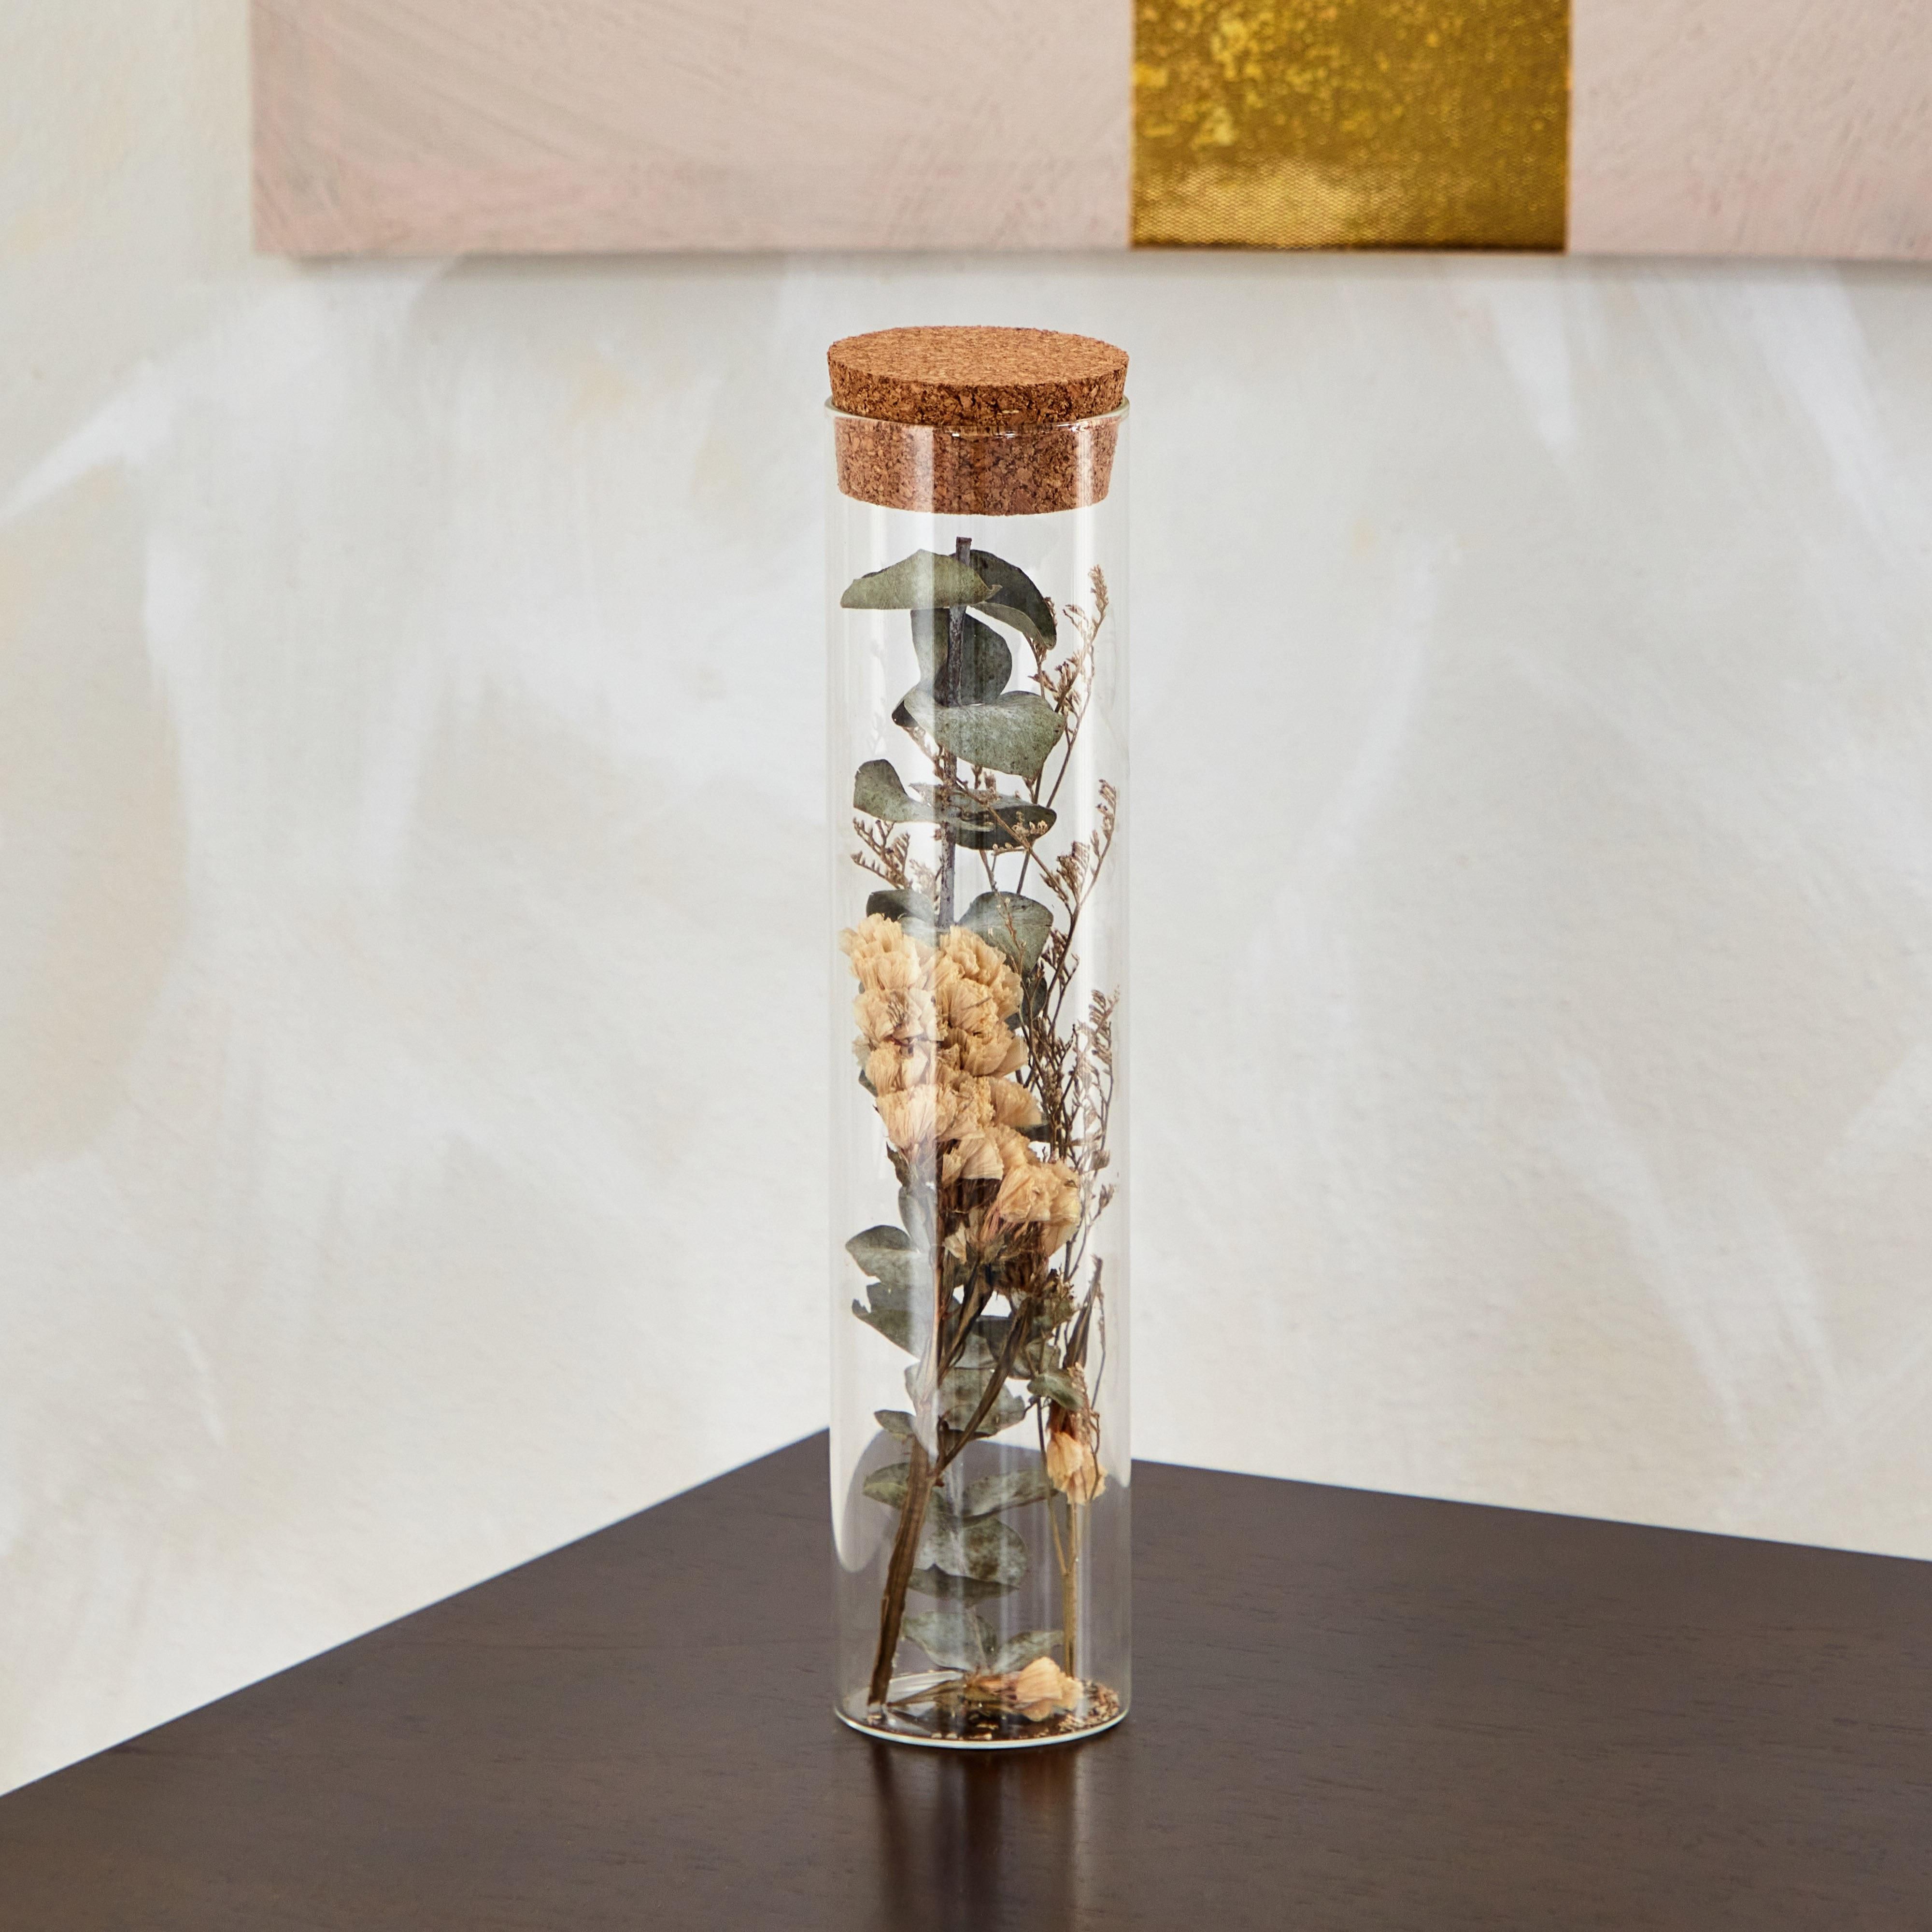 Live Clear Glass Cylinder Accent with Dried Flowers and Cork - 5x5x23 cm